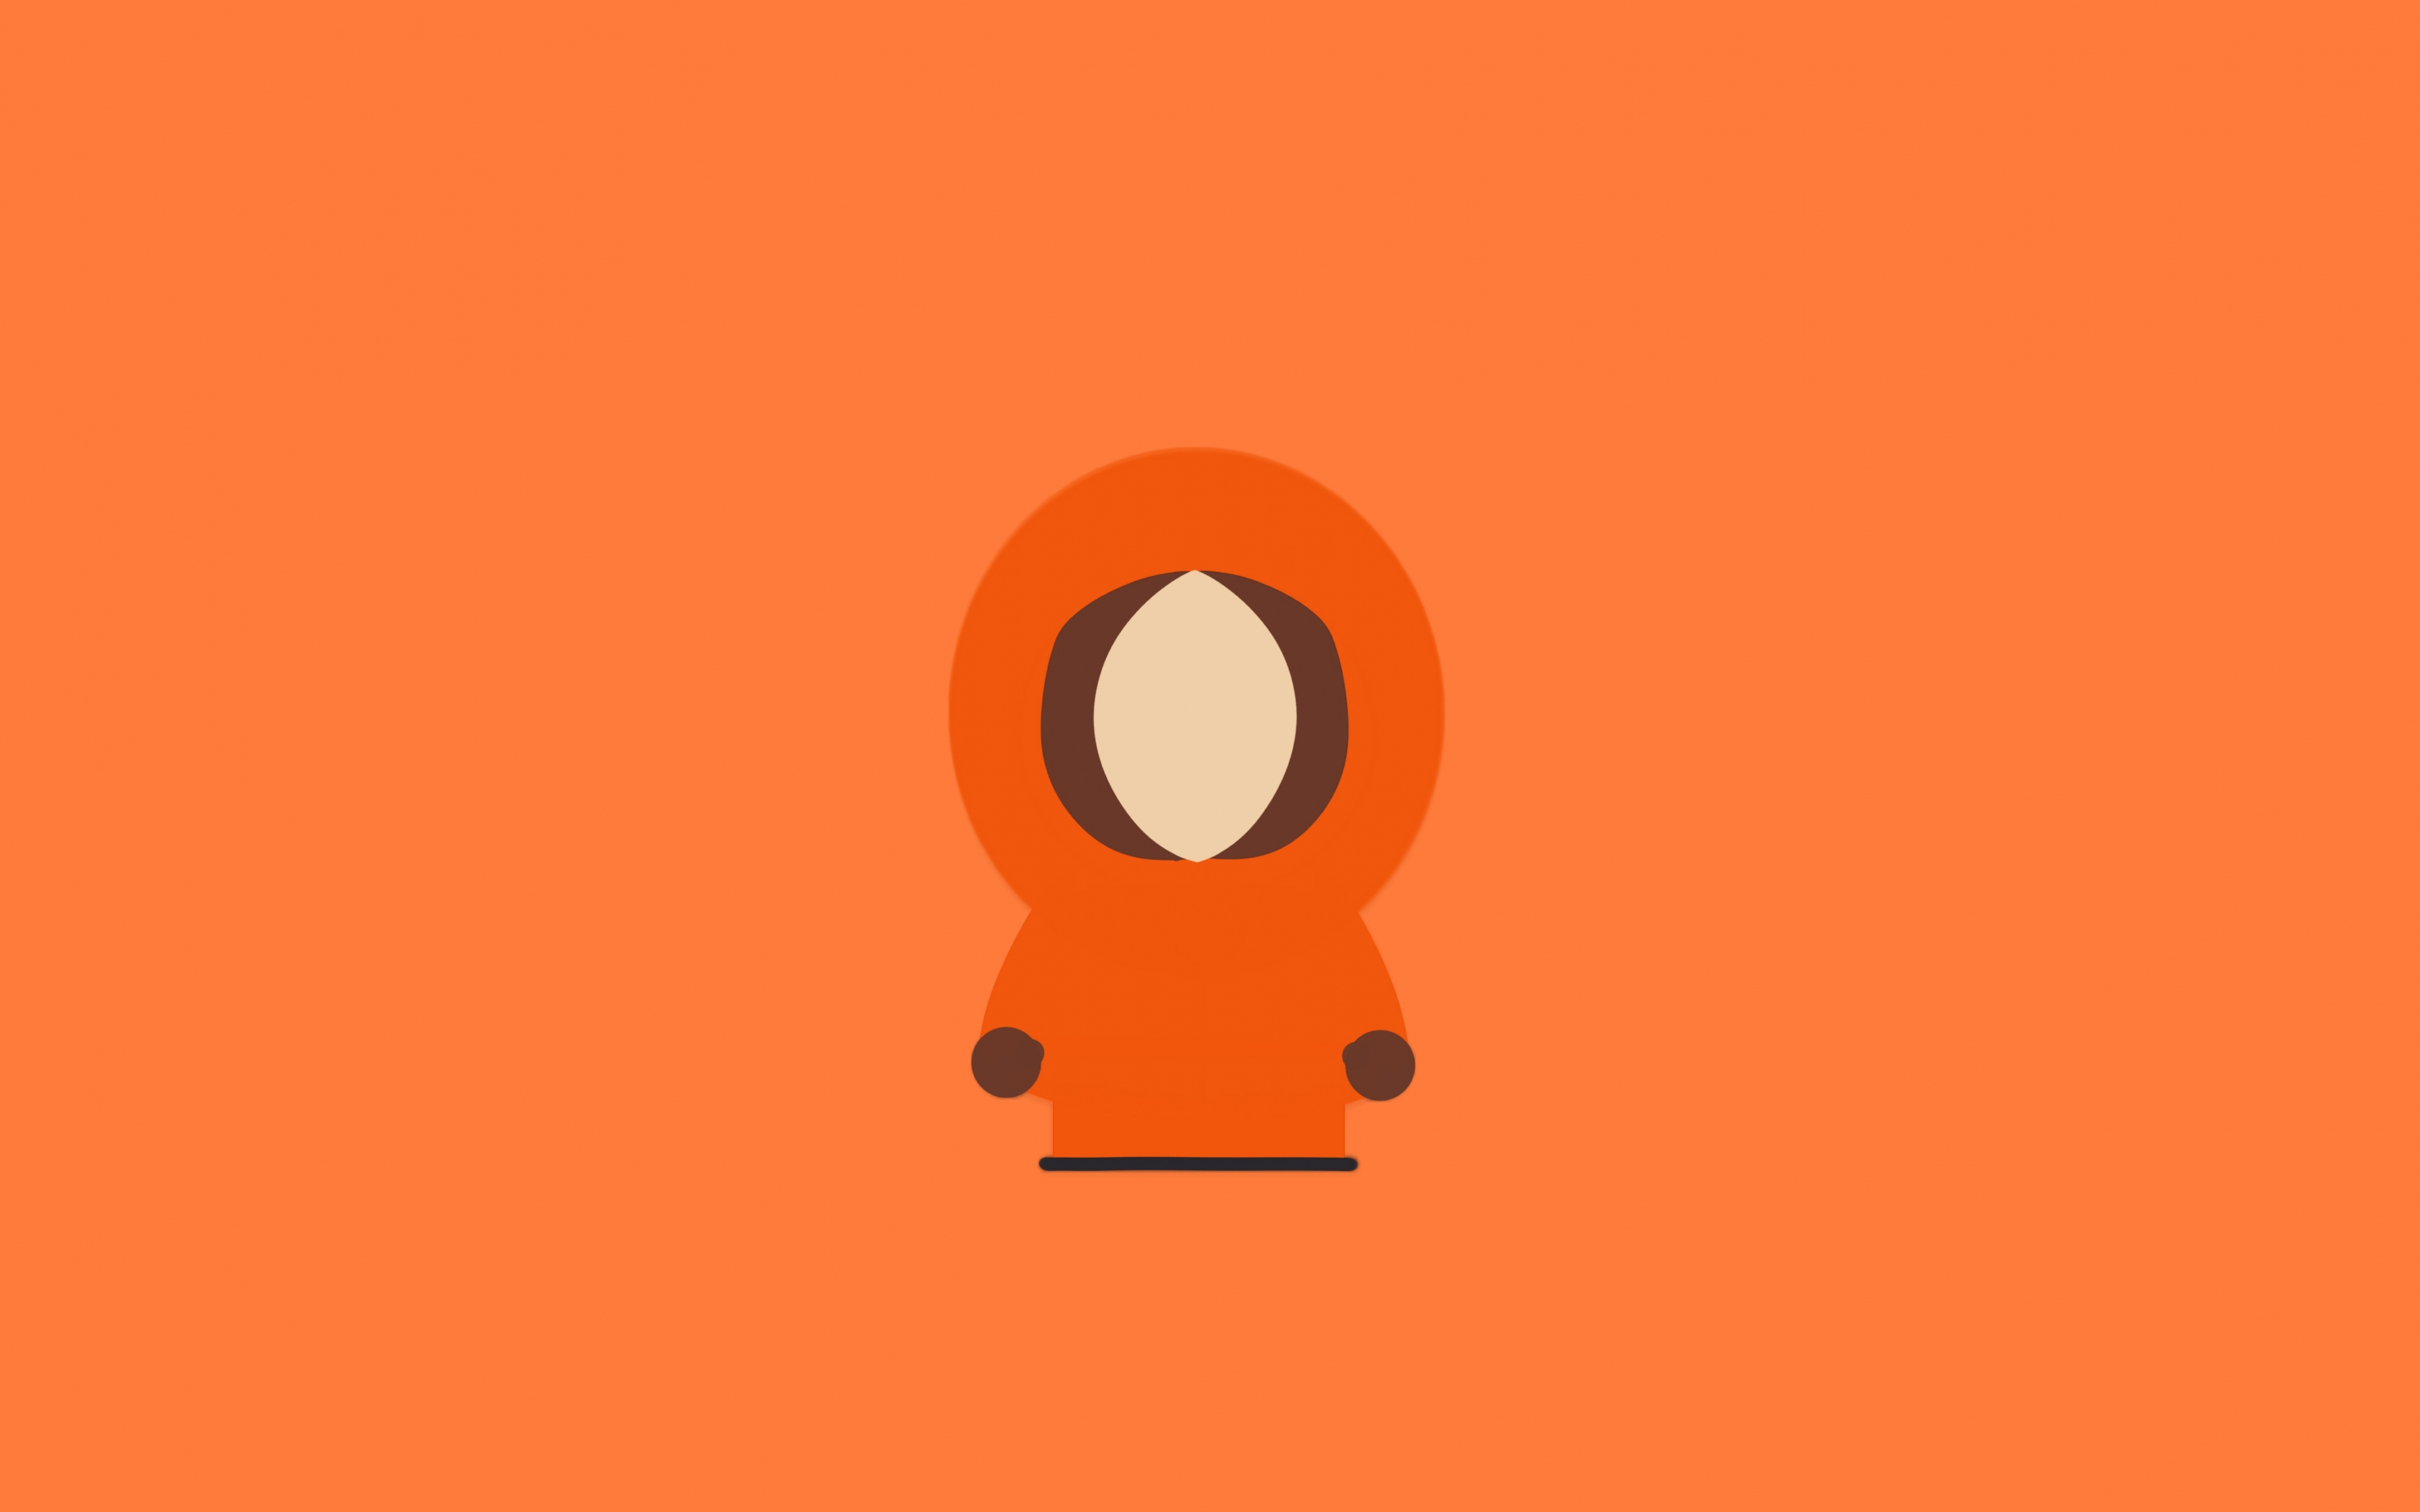 Download 3840x2400 wallpaper kenny mccormick, south park, minimal, tv show, 4k, ultra HD 16: widescreen, 3840x2400 HD image, background, 5370